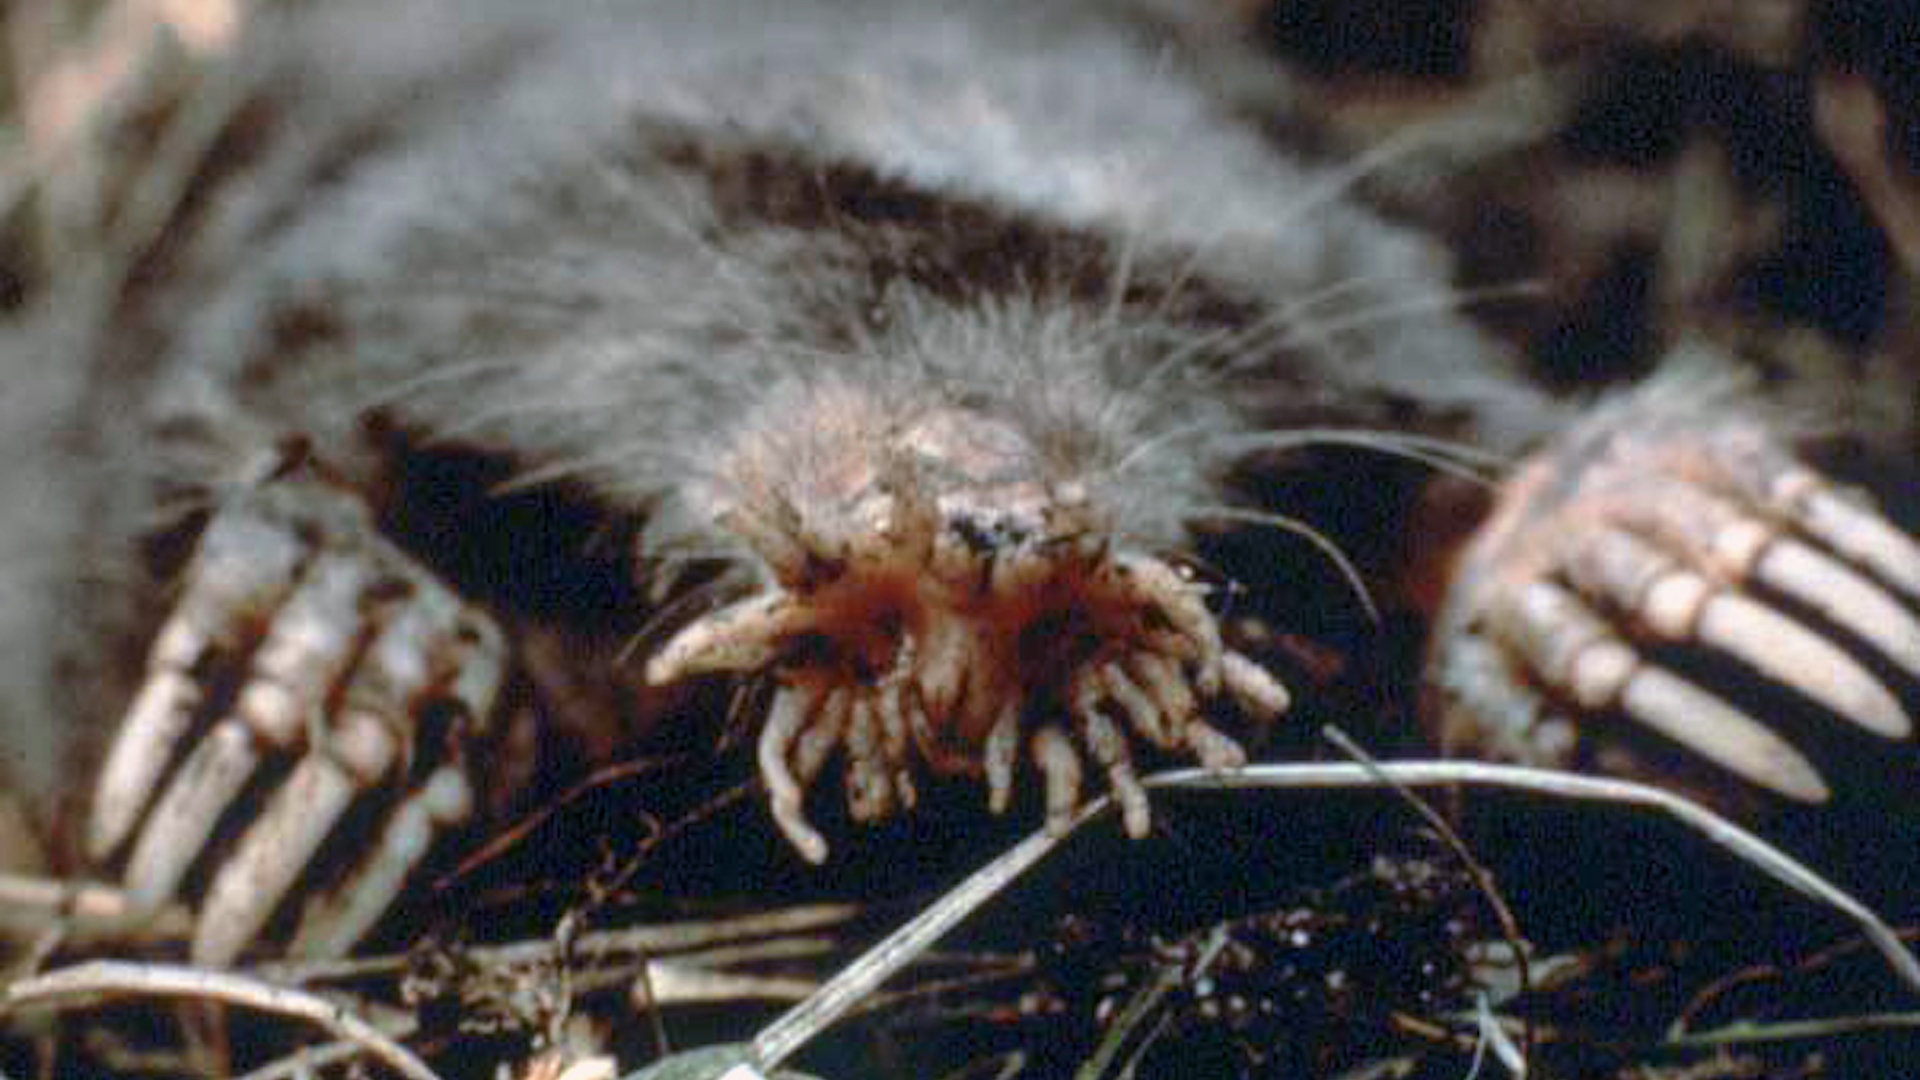 A star-nosed mole